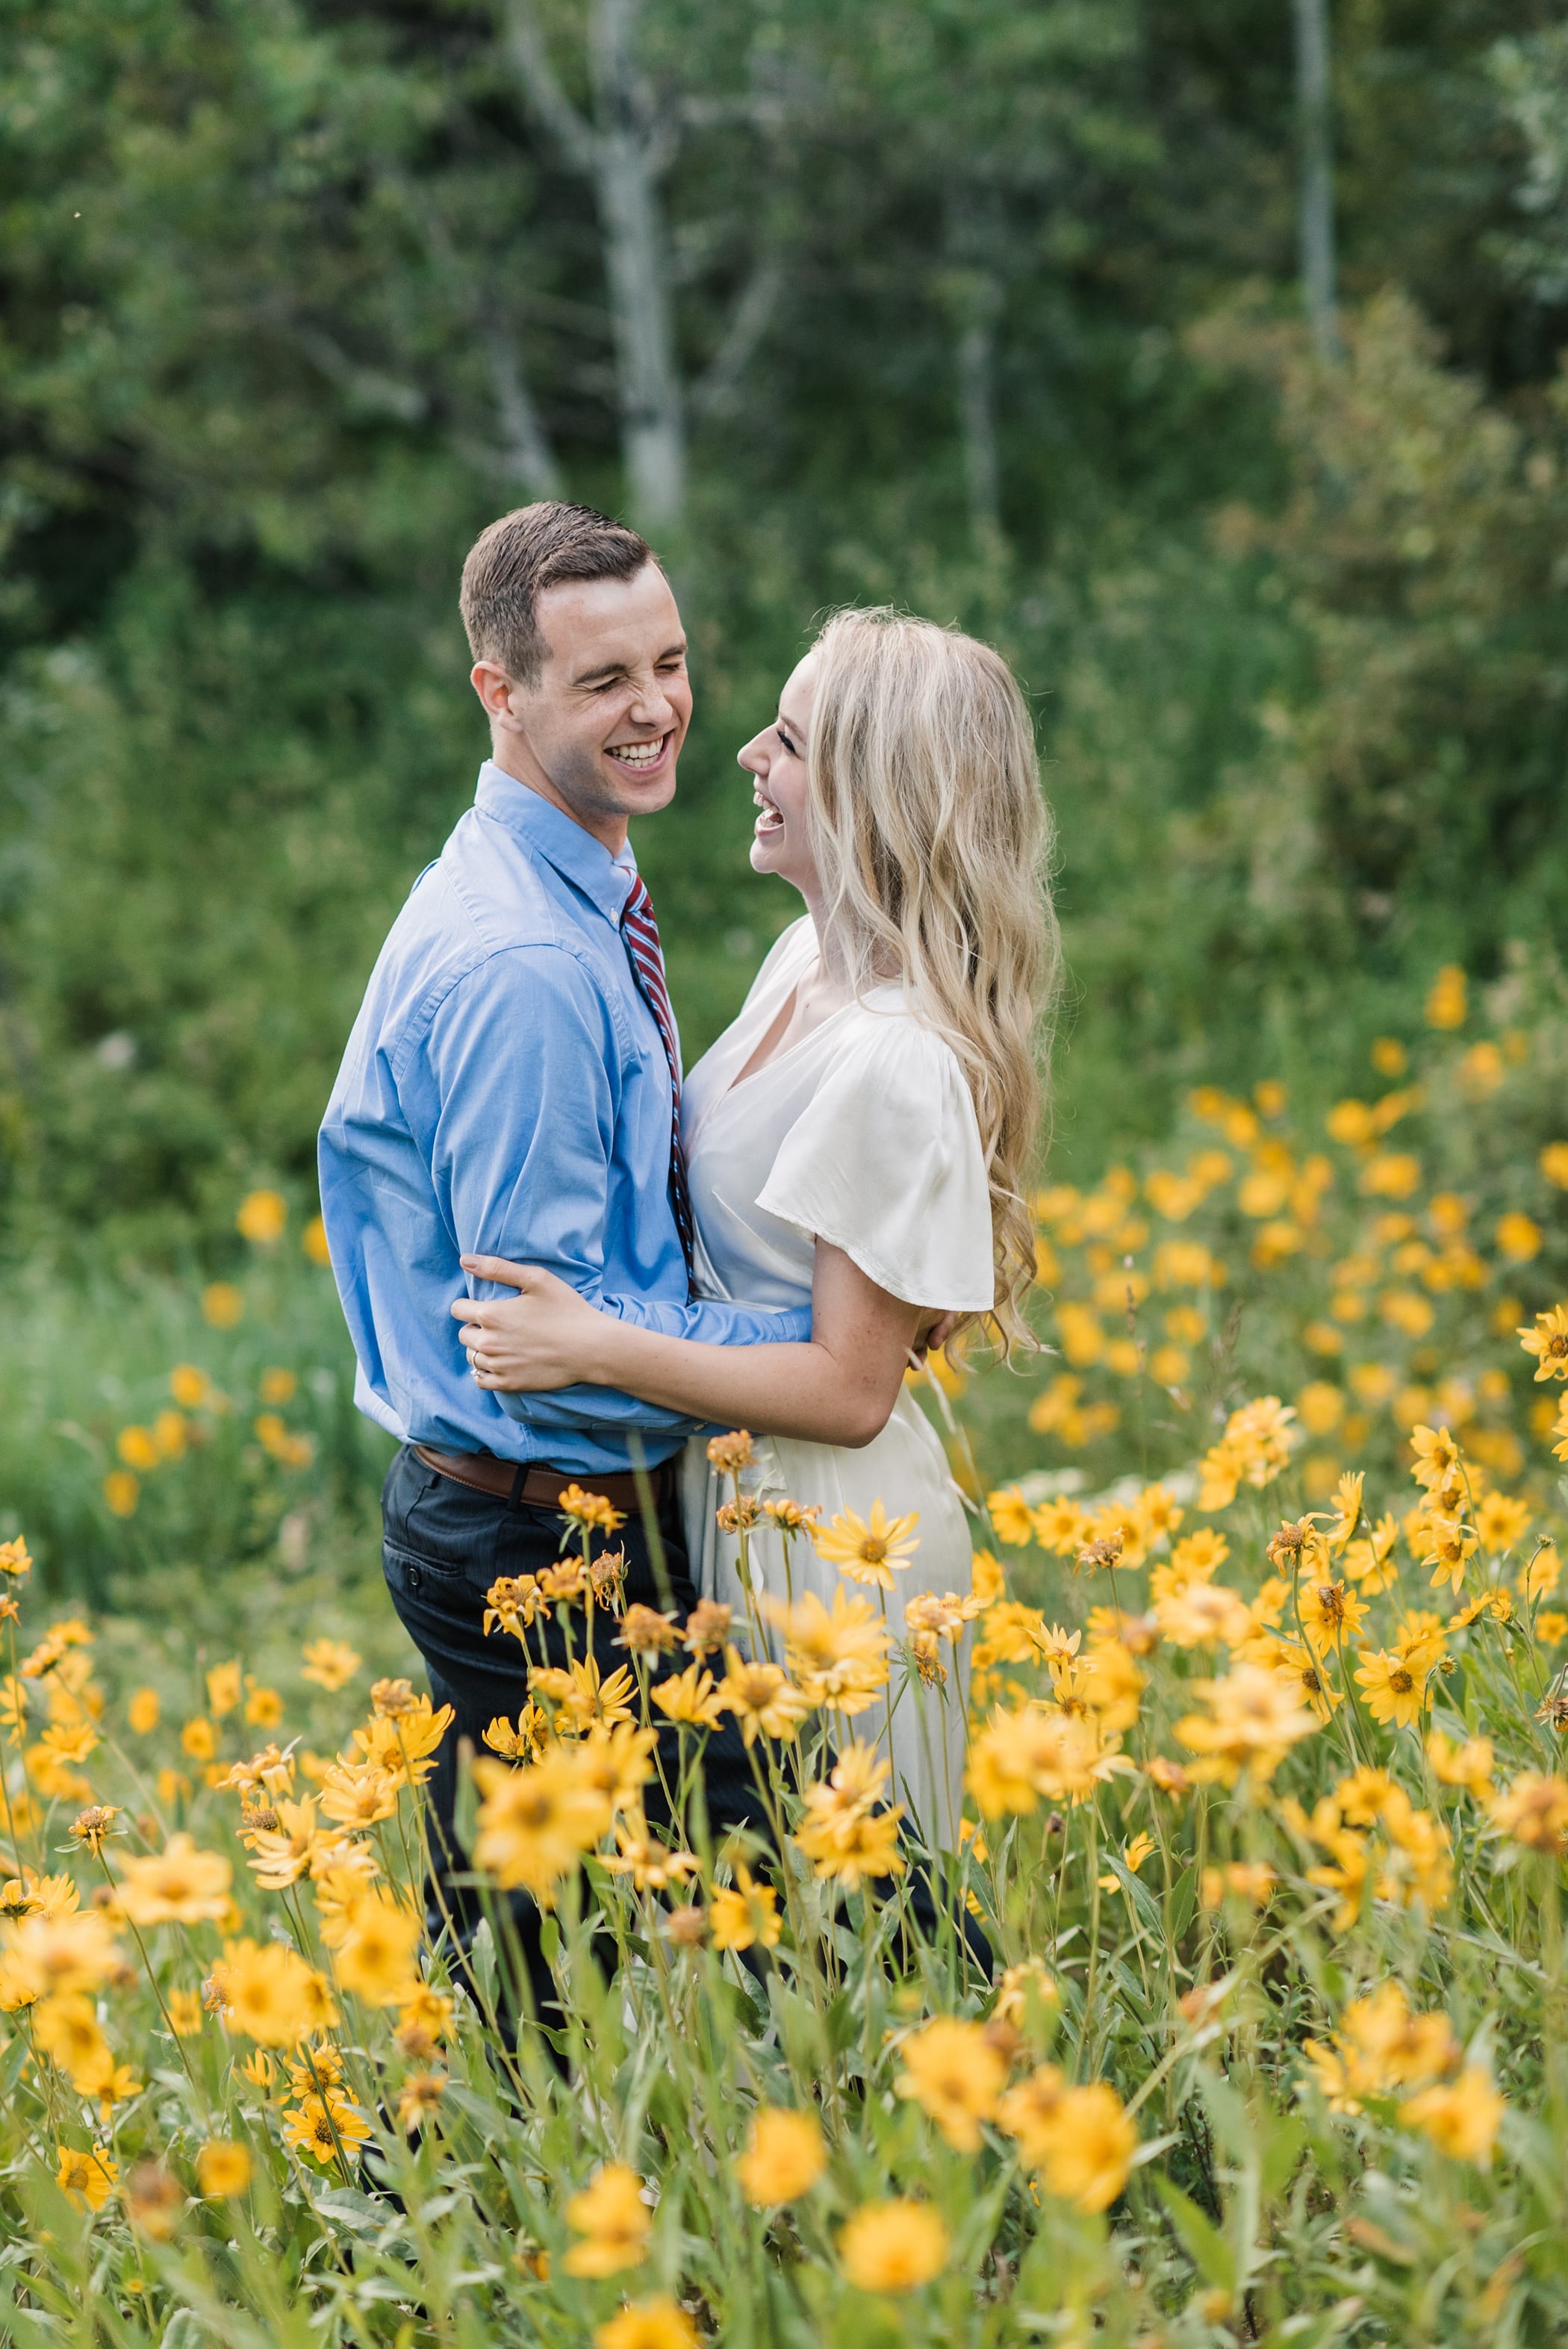 Idaho Falls Engagements | Summery Engagements in the Idaho Mountains | Michelle & Logan